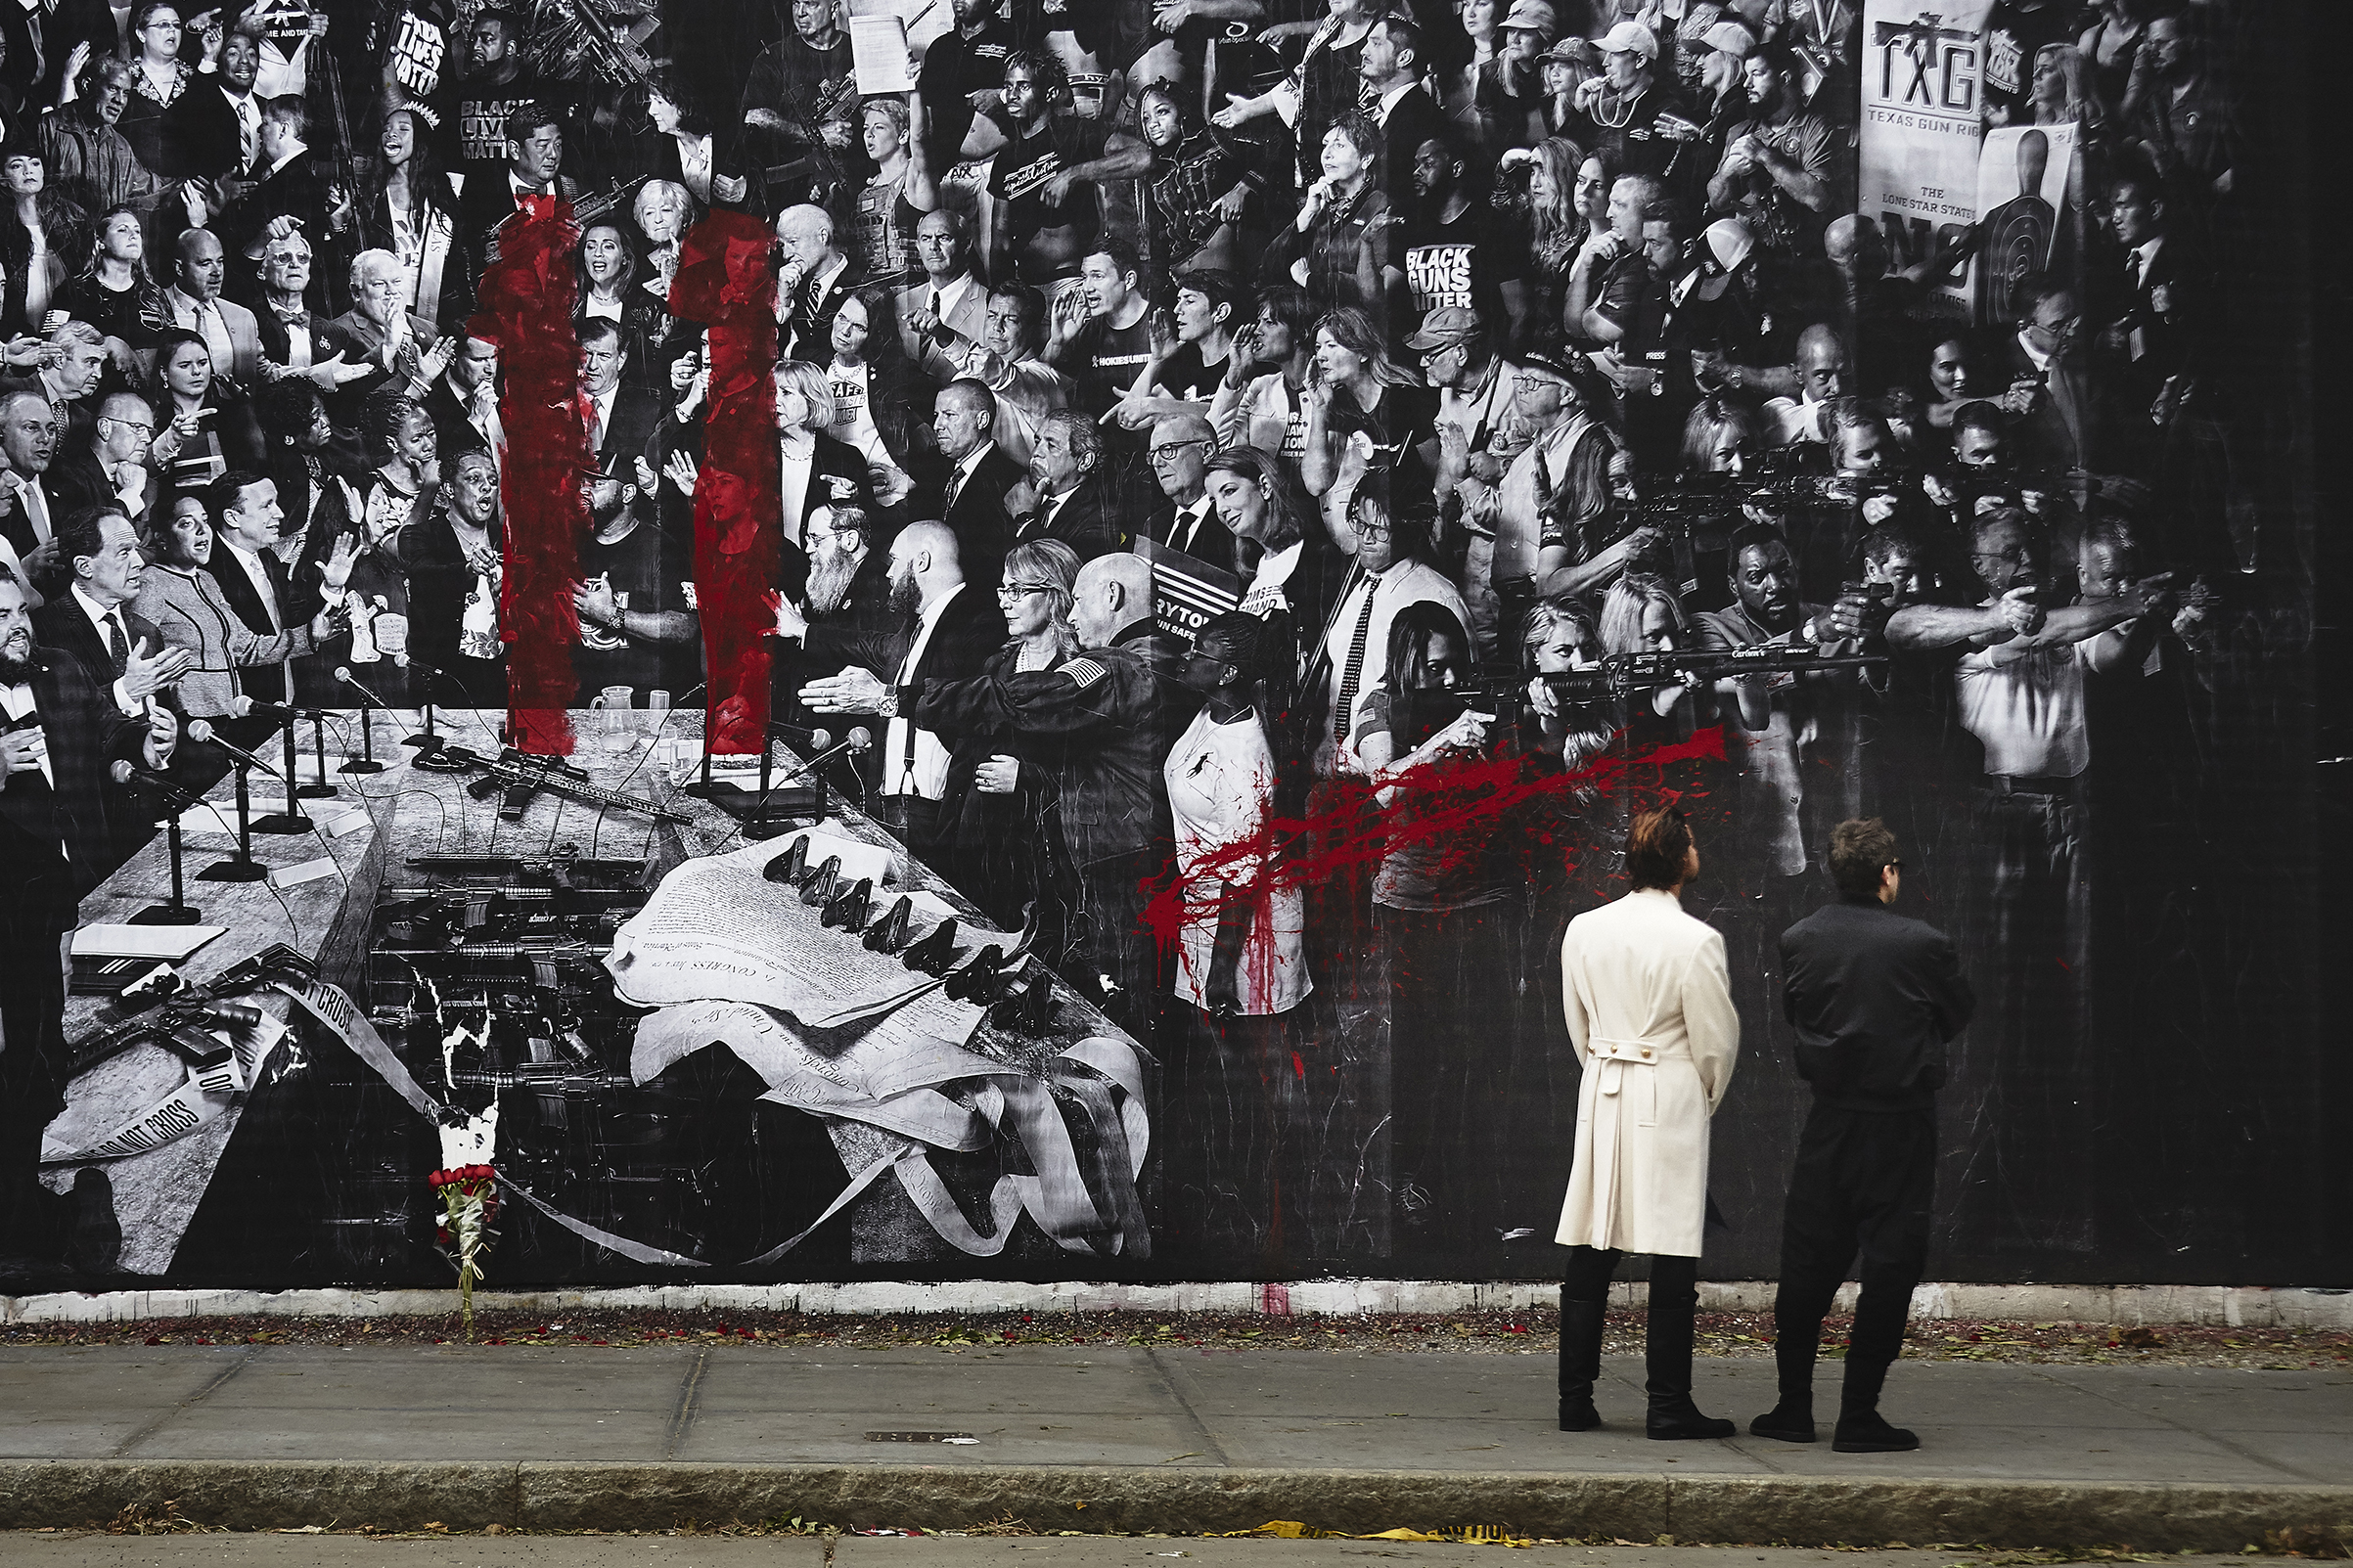 A red spray painted number 11, an apparent reference to the individuals slain in Pittsburgh, is seen on the "Guns in America" mural created by TIME and the artist JR on the Houston Bowery Wall in New York City. (Andres Kudacki for TIME)